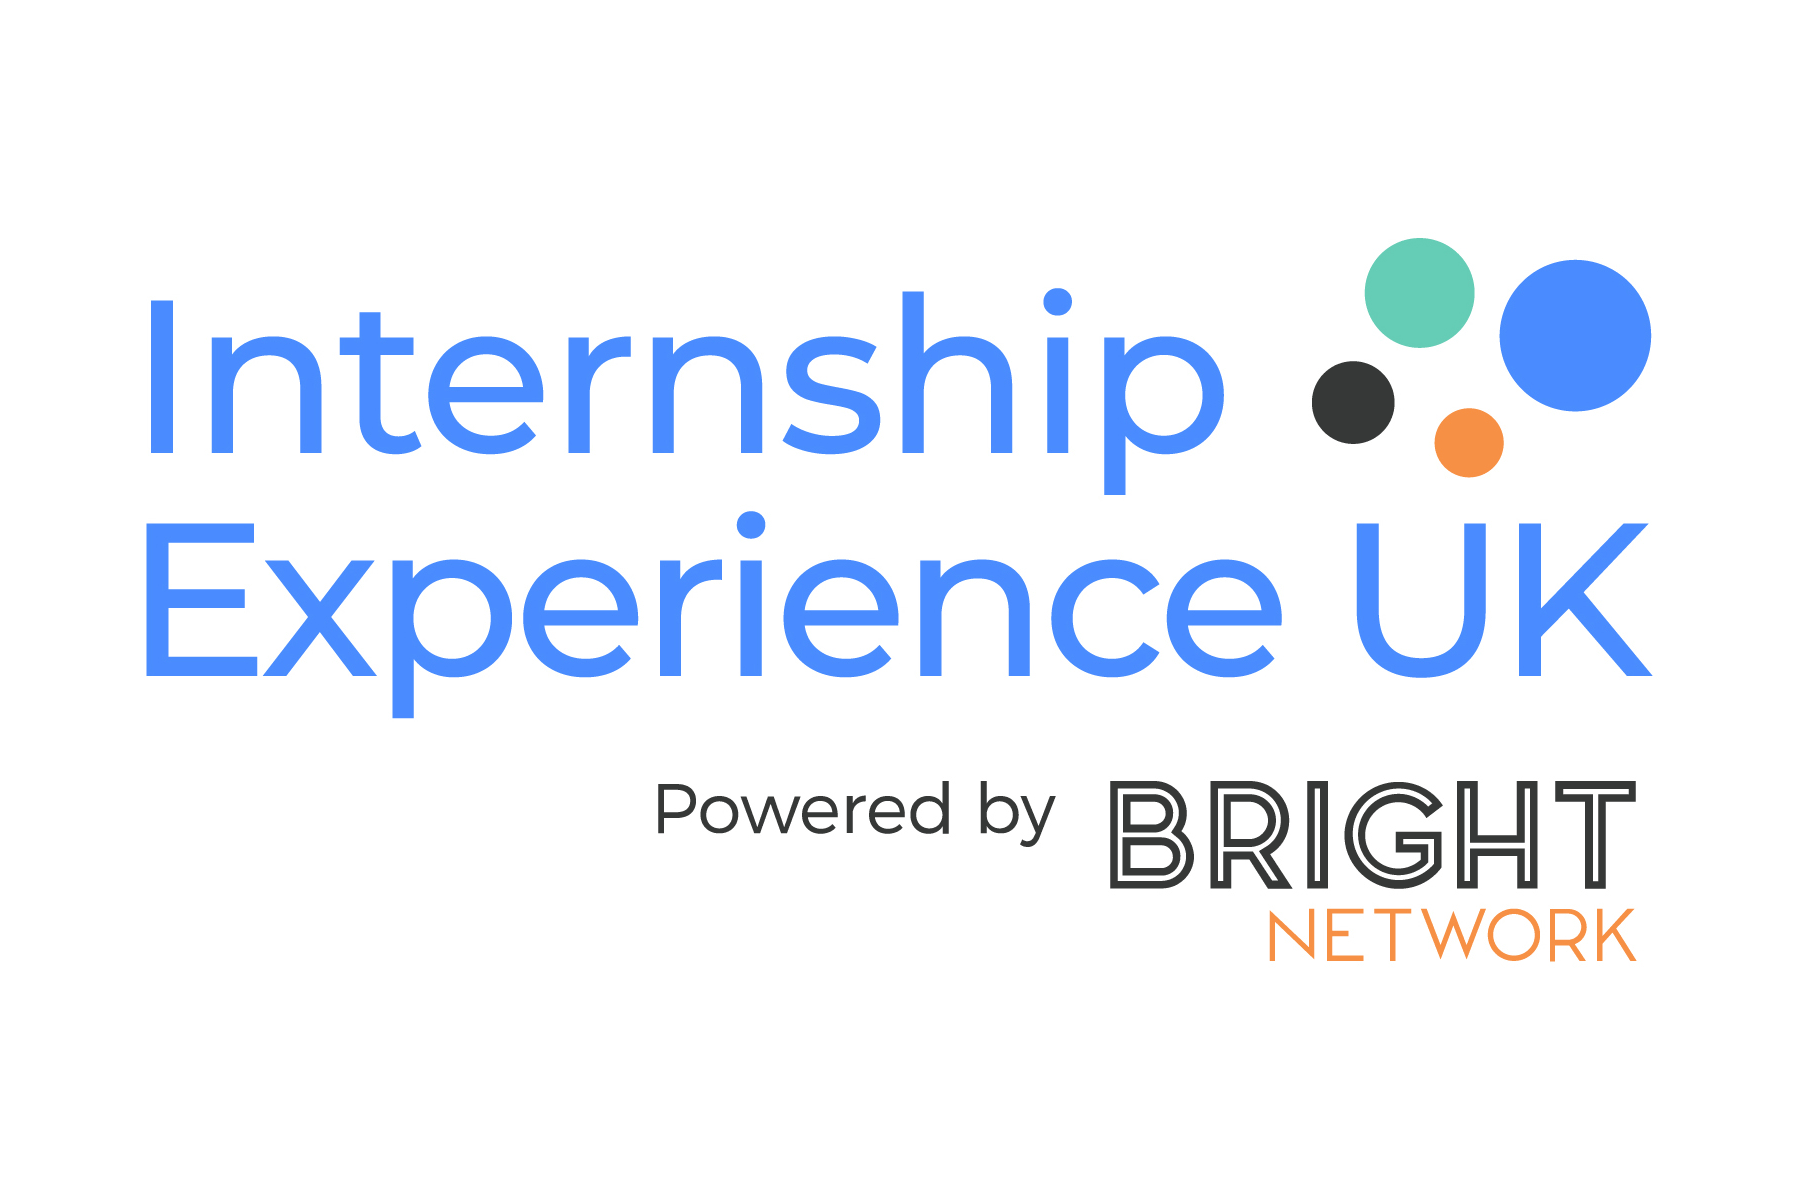 Internship Experience UK, powered by Bright Network